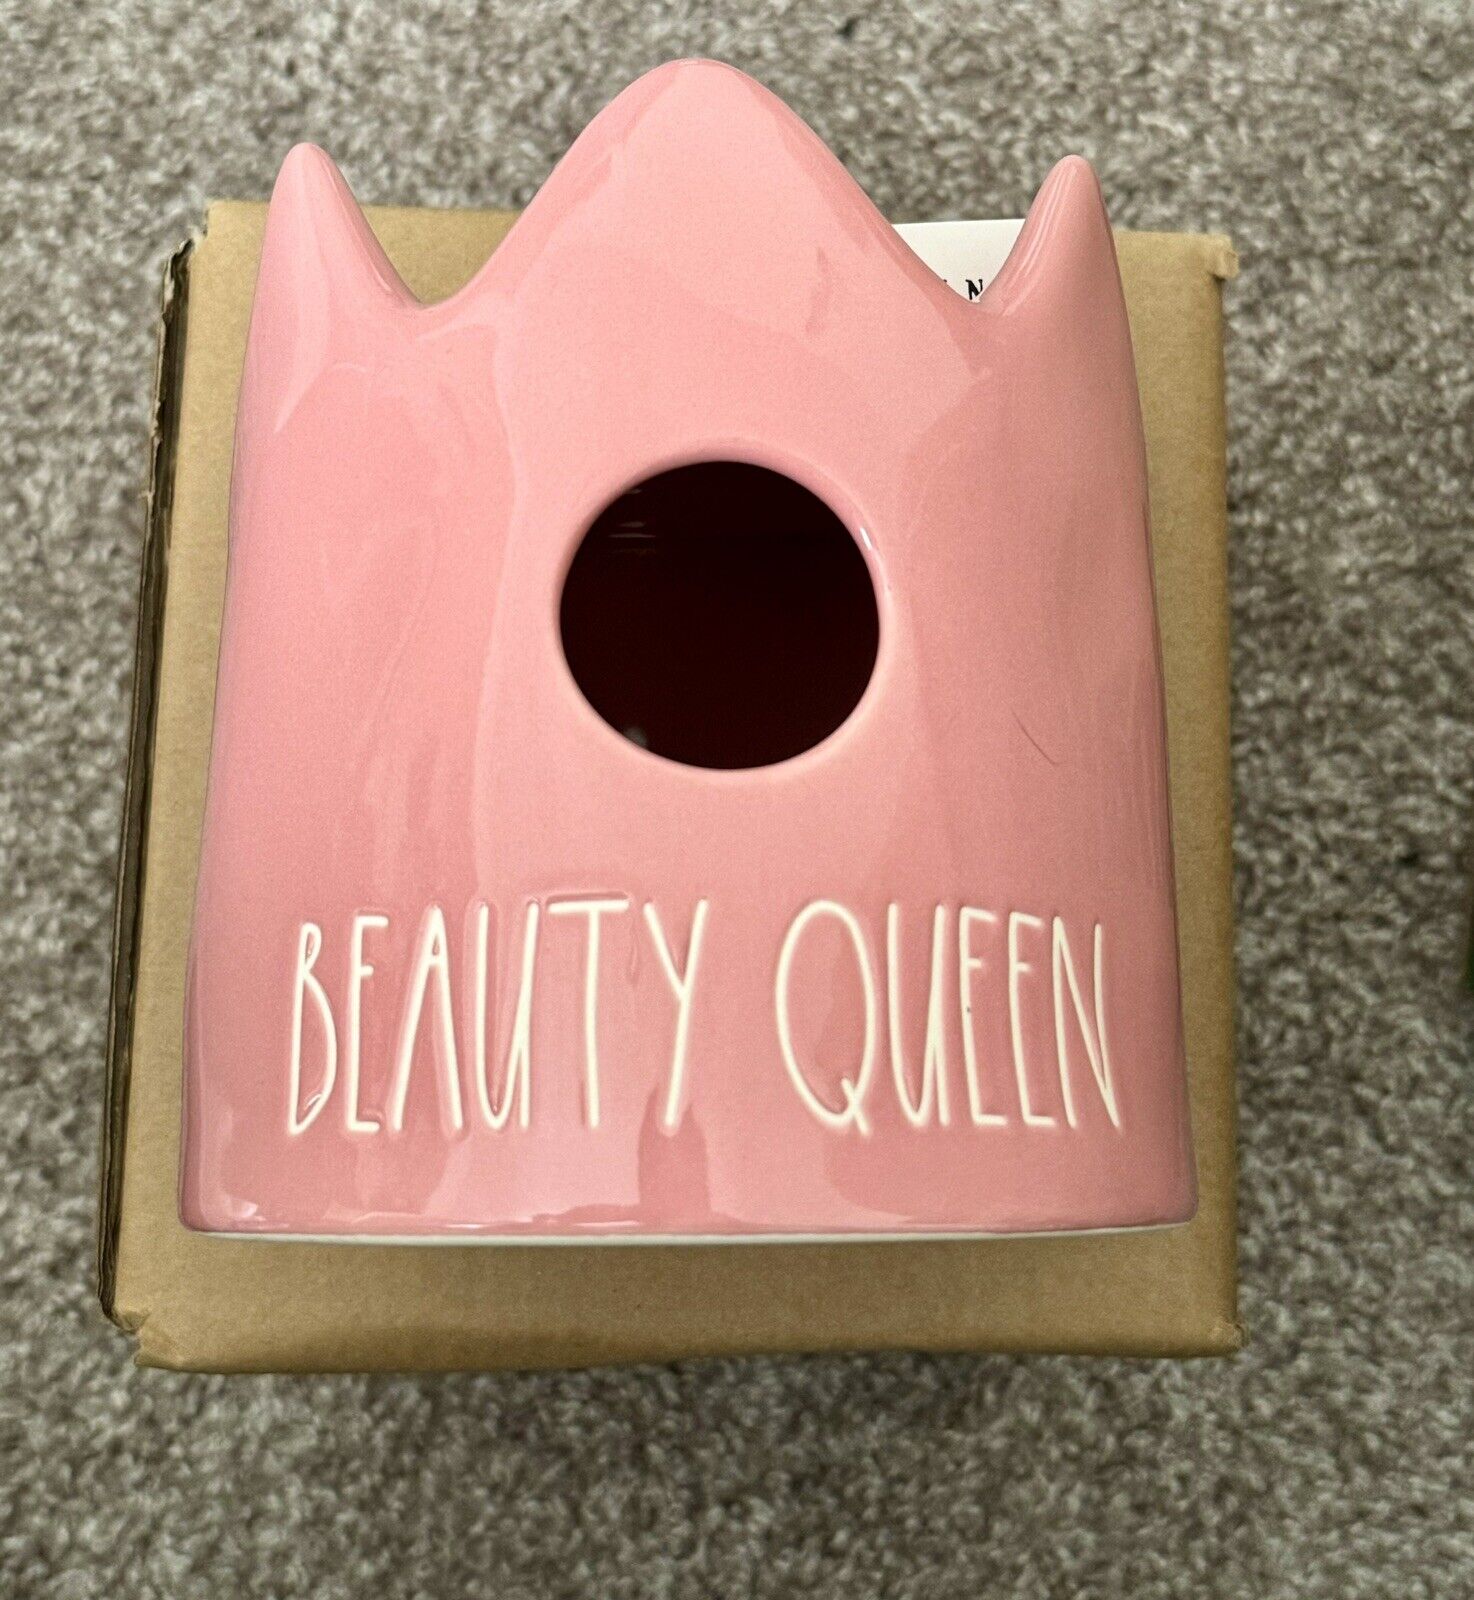 Rae Dunn “Beauty Queen” Crown shaped bird house NEW In Original Box By Magenta